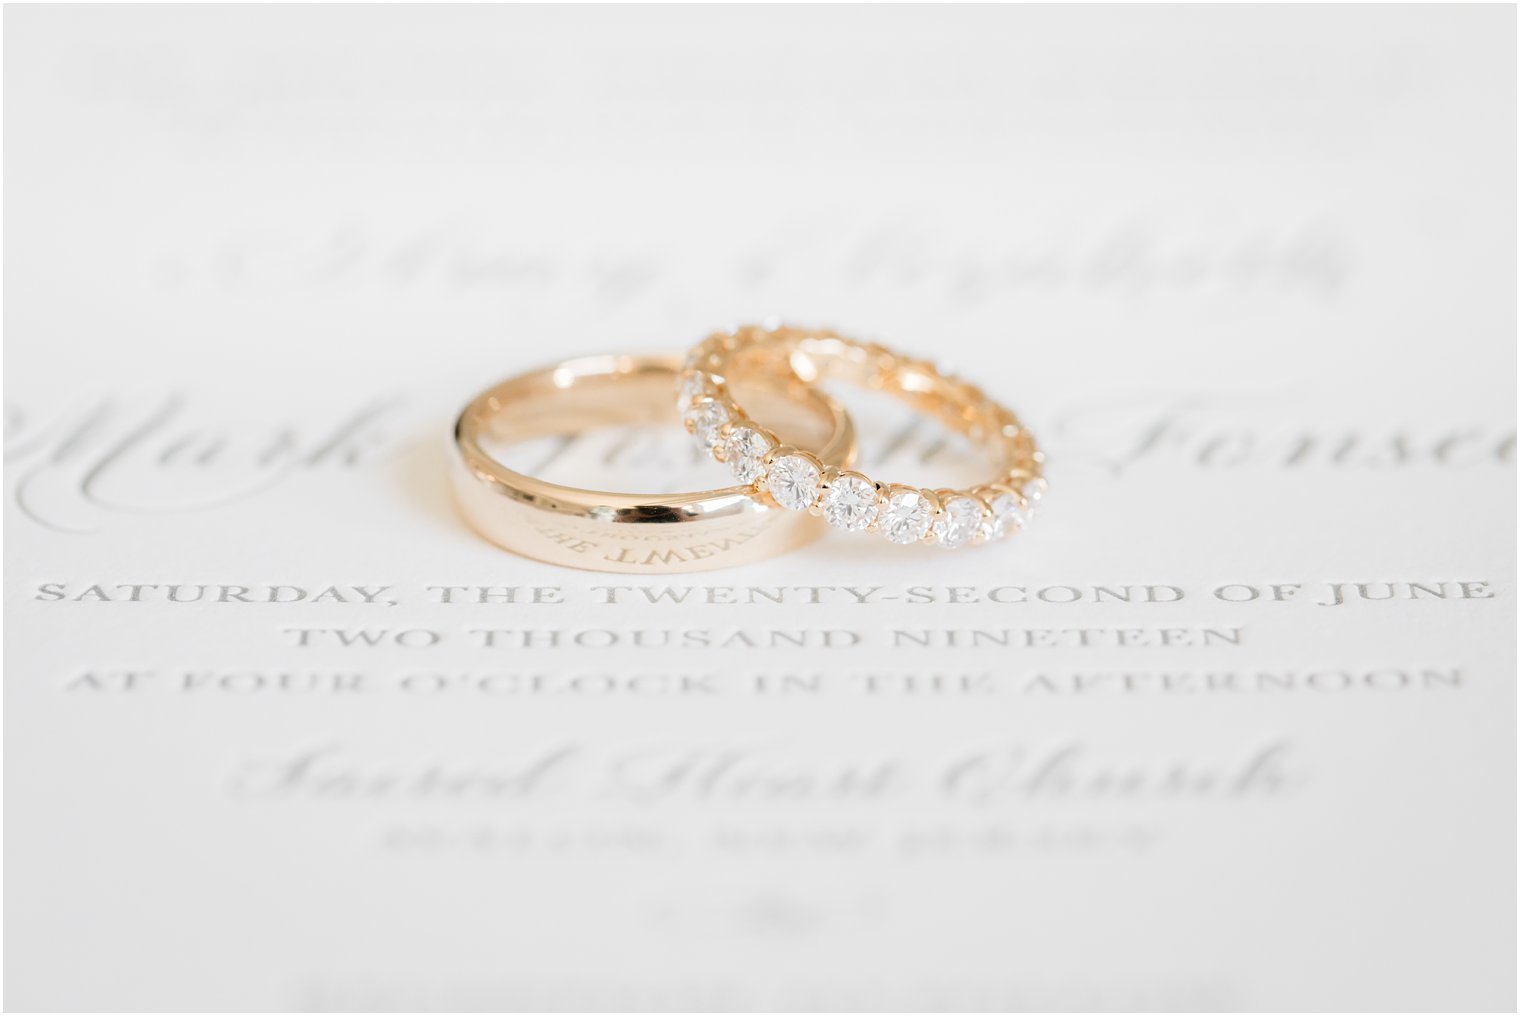 Wedding bands on invitation by Smitten on Paper